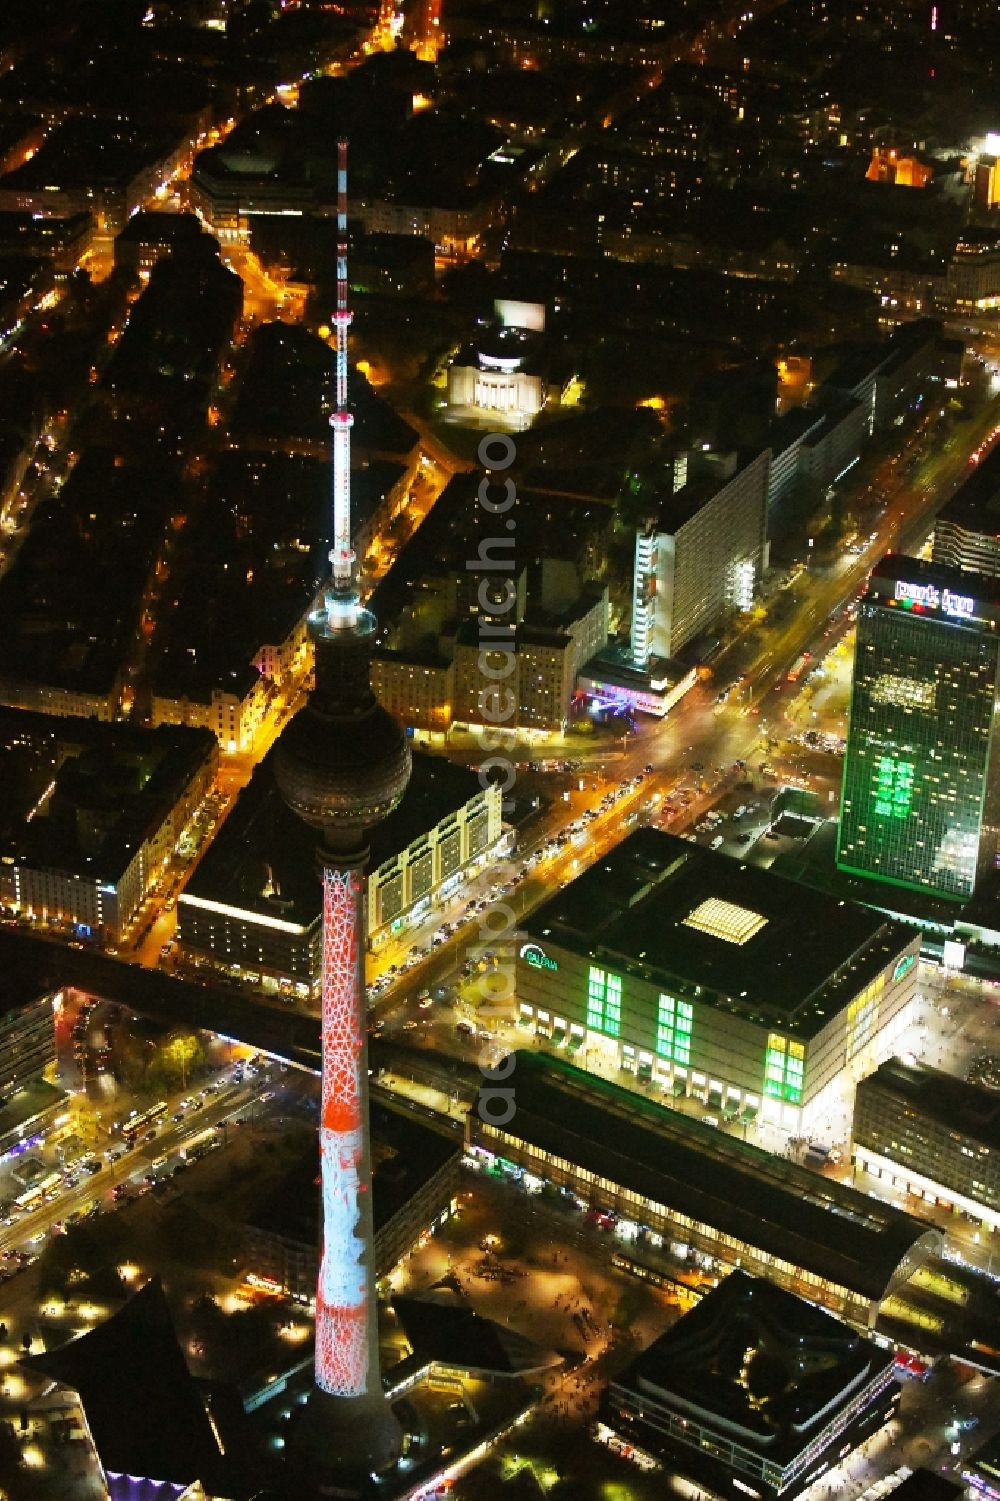 Berlin at night from the bird perspective: Night lighting The city center in the downtown area on tv- tower - Alexanderplatz in the district Mitte in Berlin, Germany